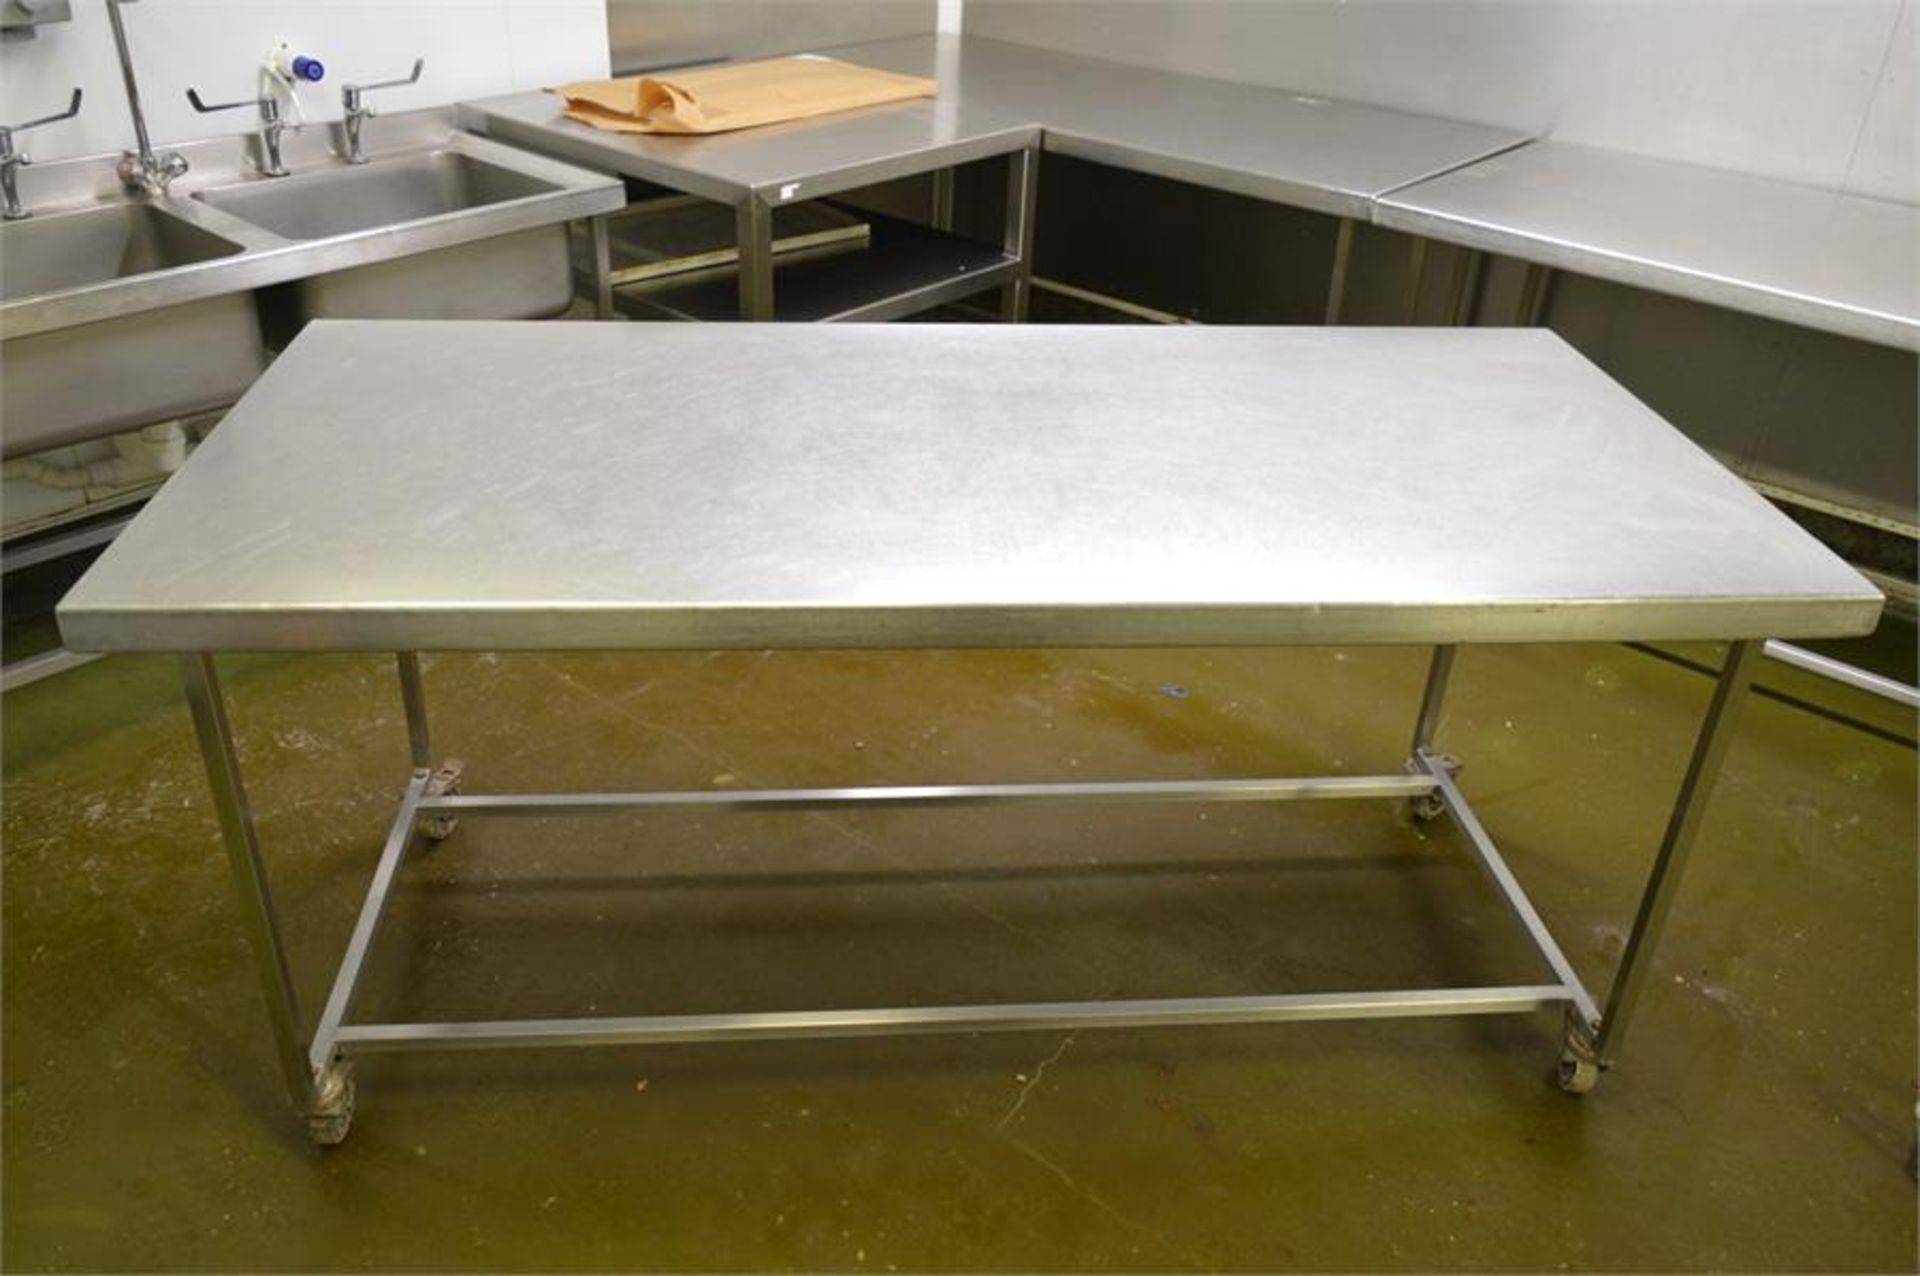 Stainless steel mobile prep table, 1.87m (w) x 0.87m (d) x 0.88m (h) (Located at Continental